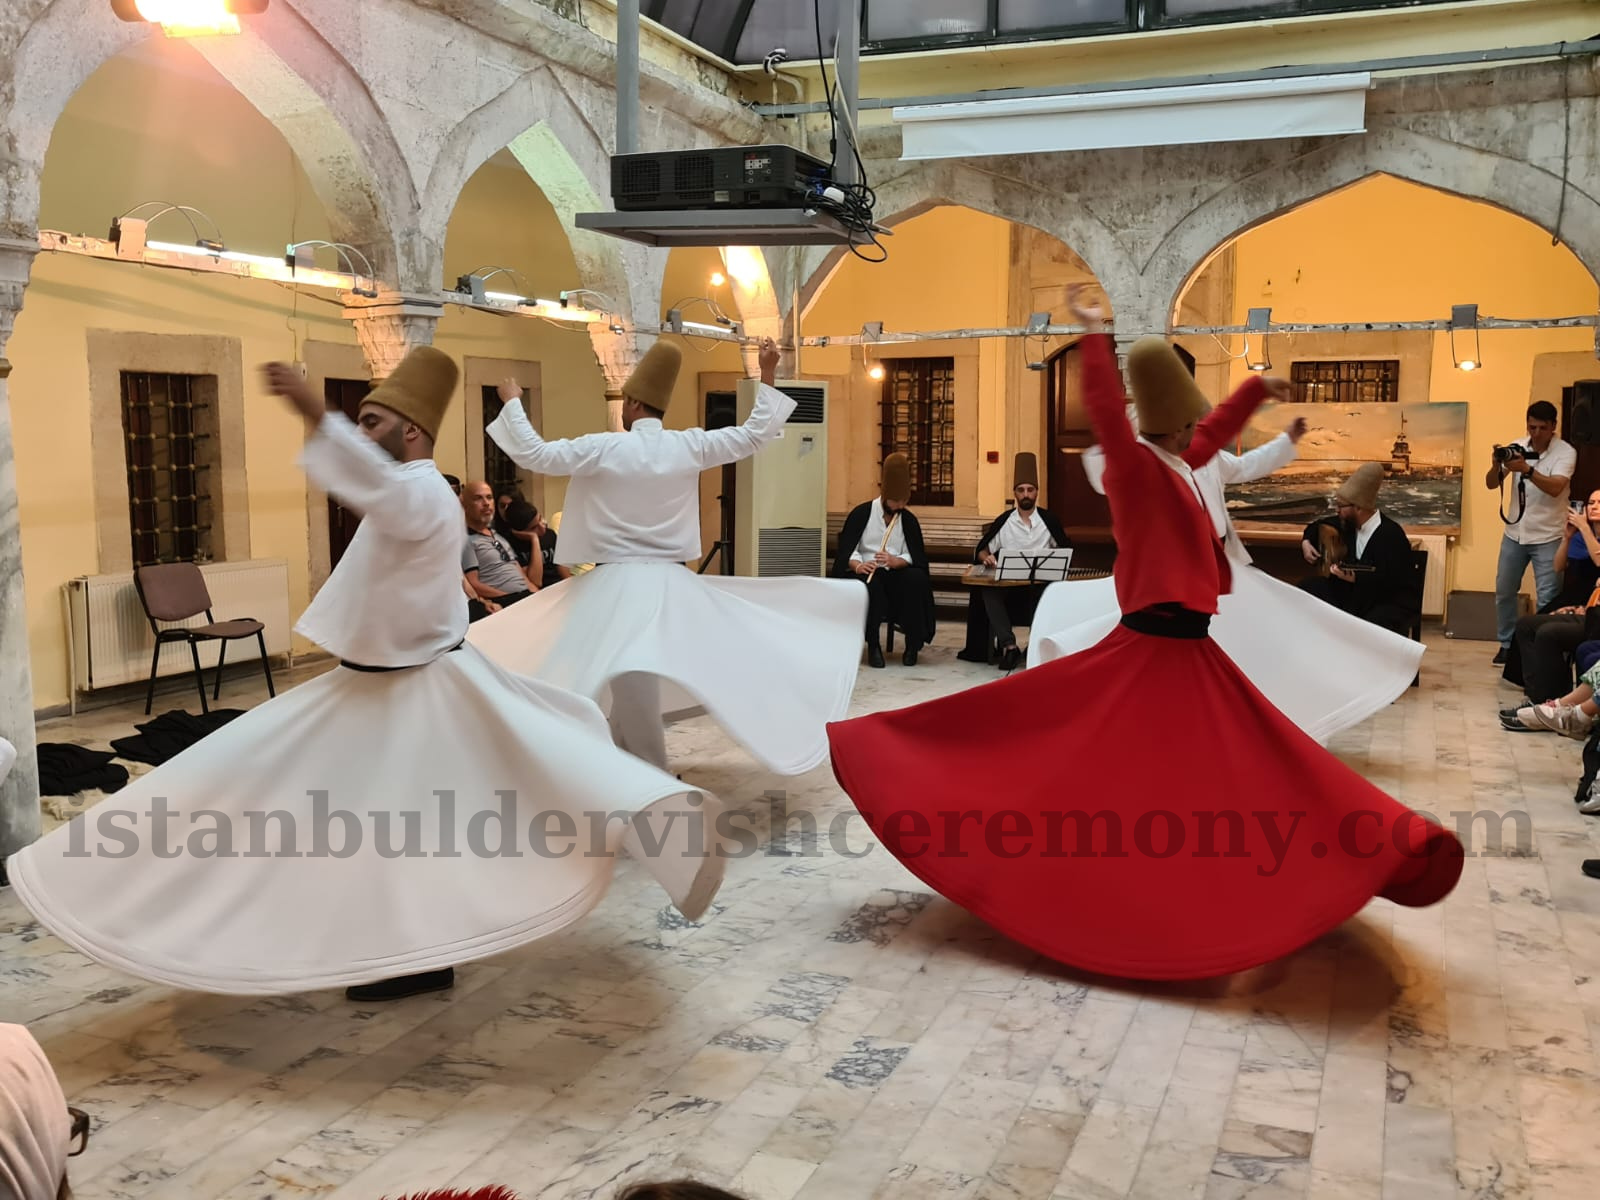 The Hypnotic Whirl of Dervishes